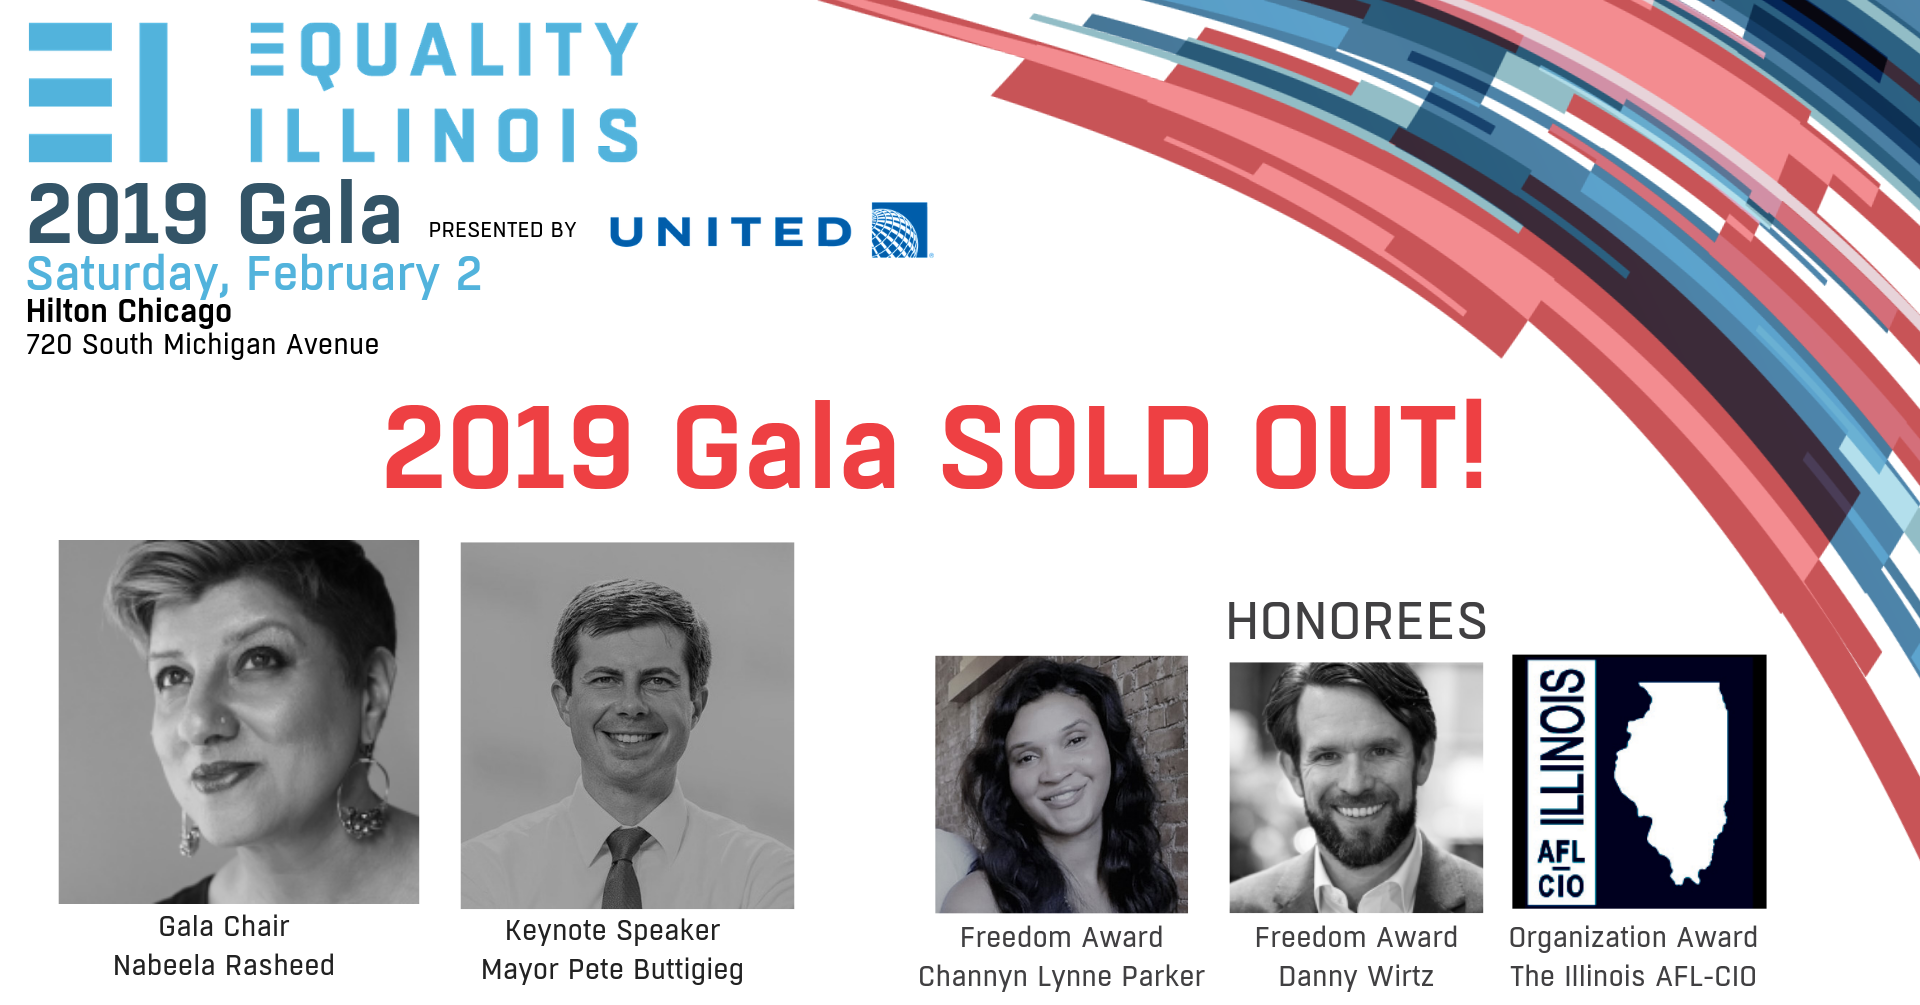 Equality Illinois 2019 Gala SOLD OUT! Equality Illinois